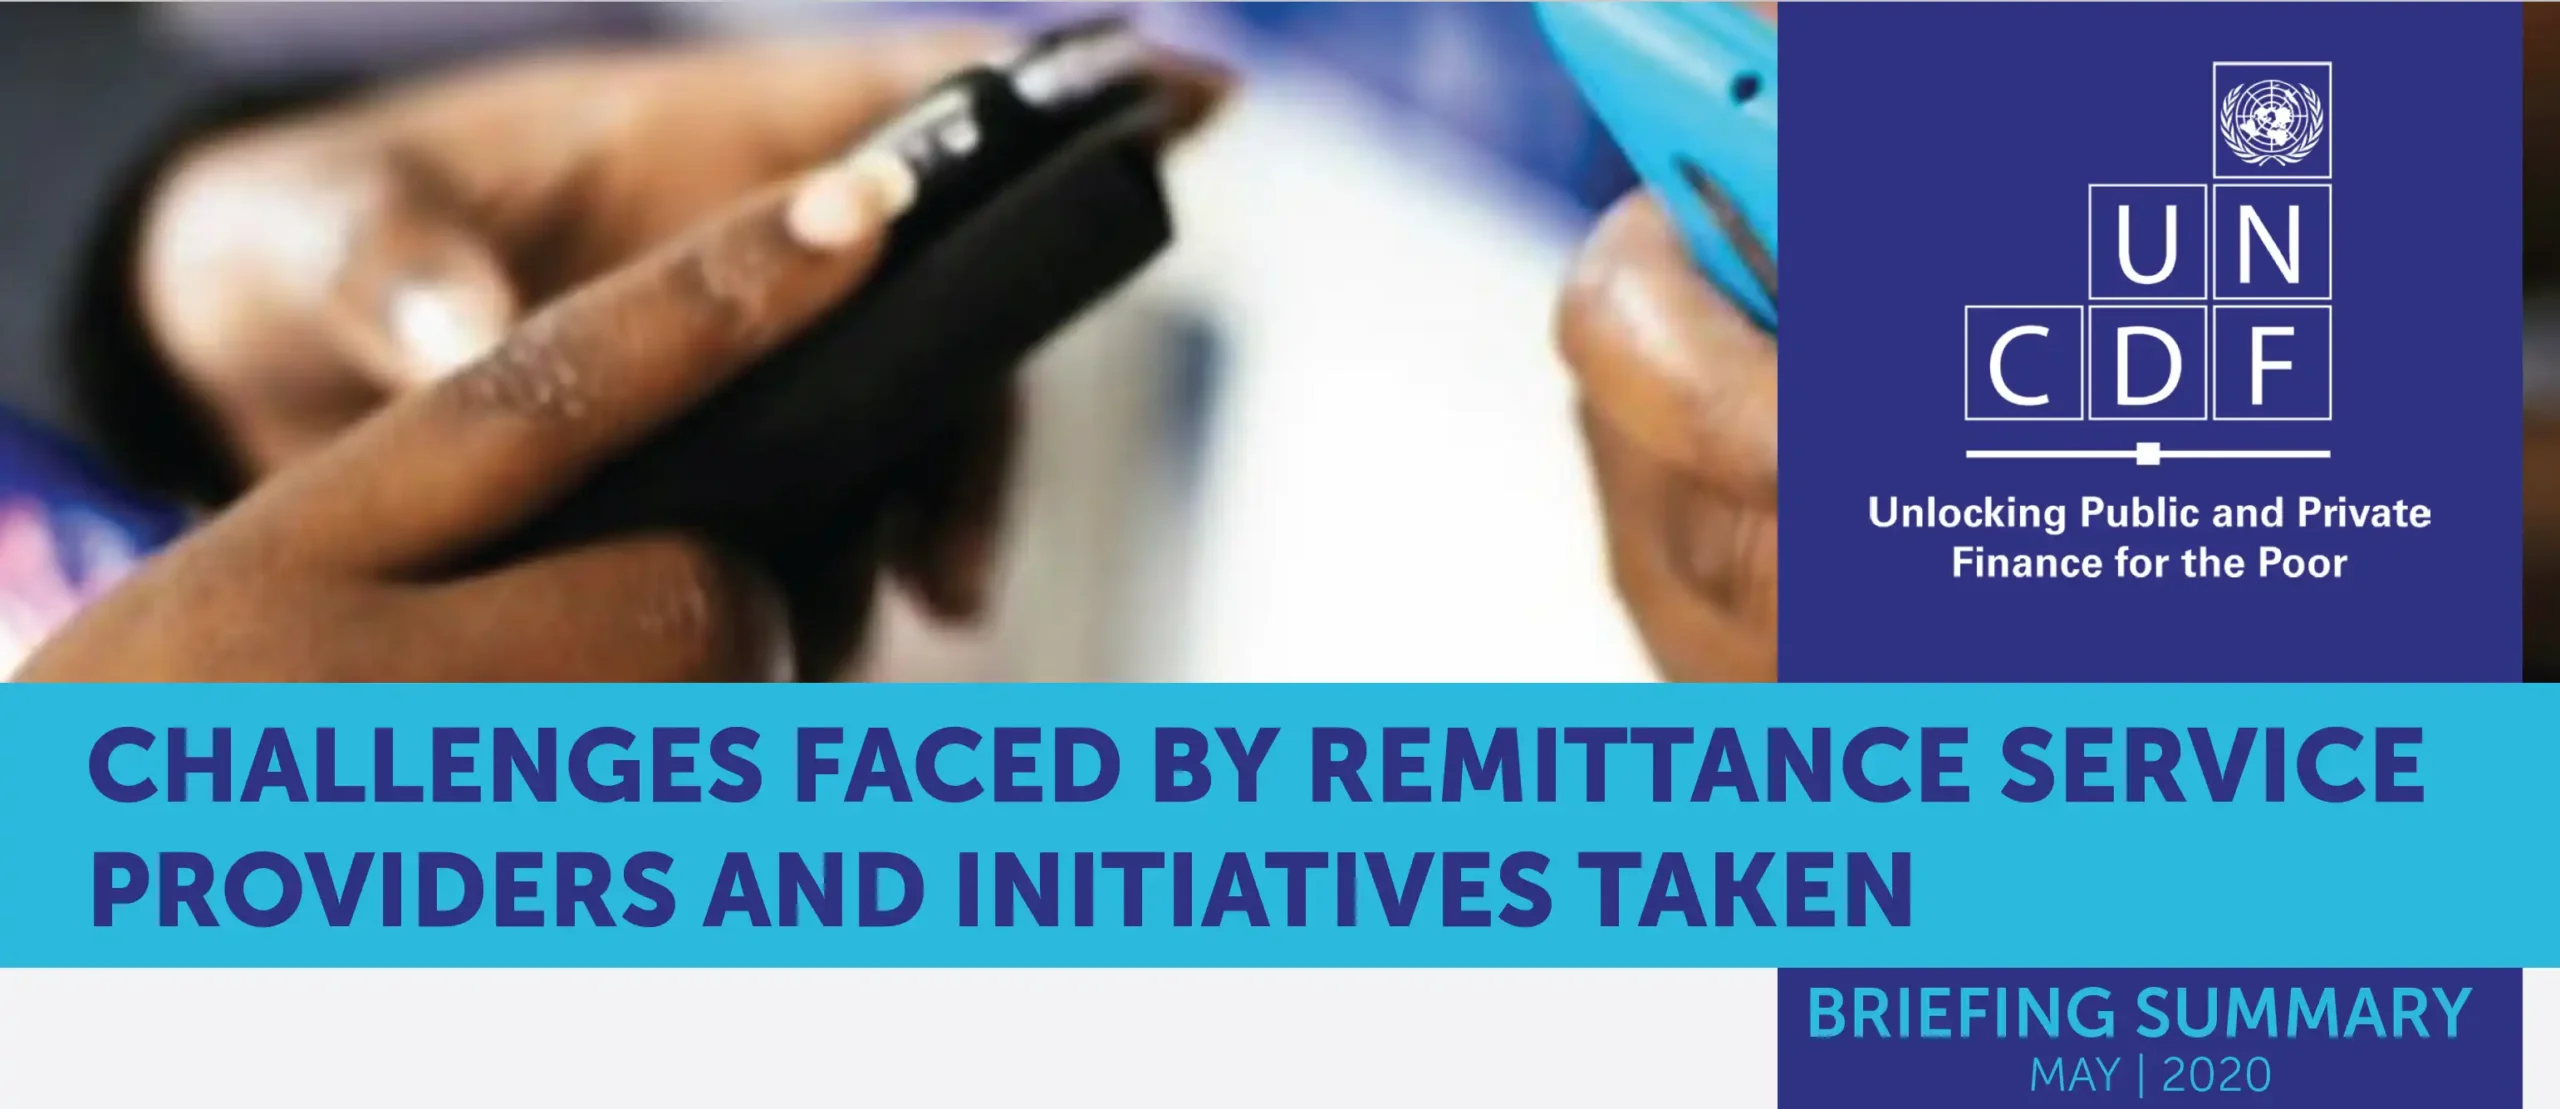 Challenges Faced by Remittance Service Providers and Initiatives Taken